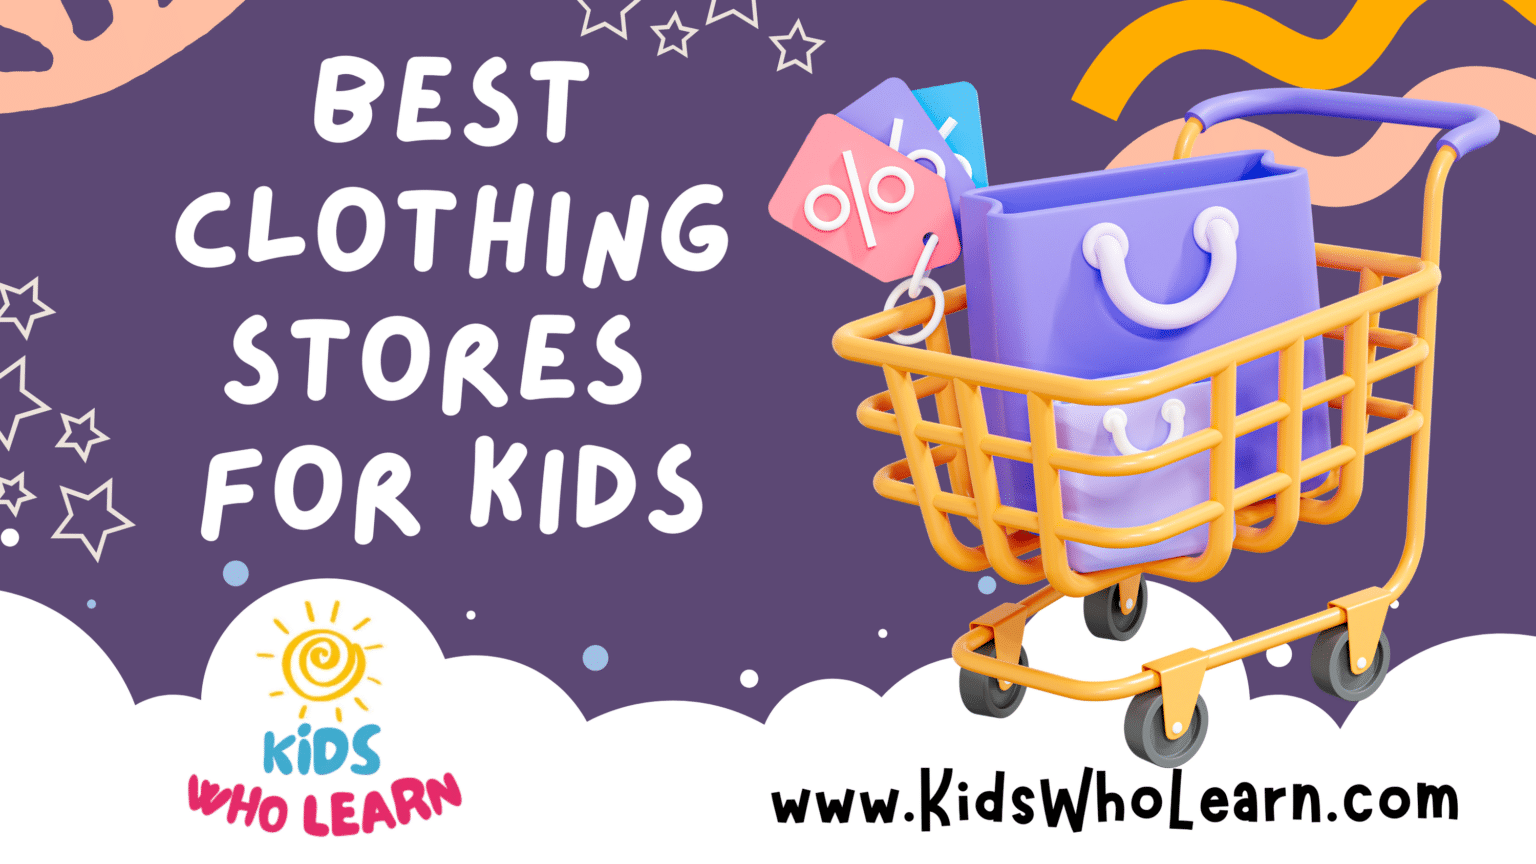 Best Clothing Stores For Kids